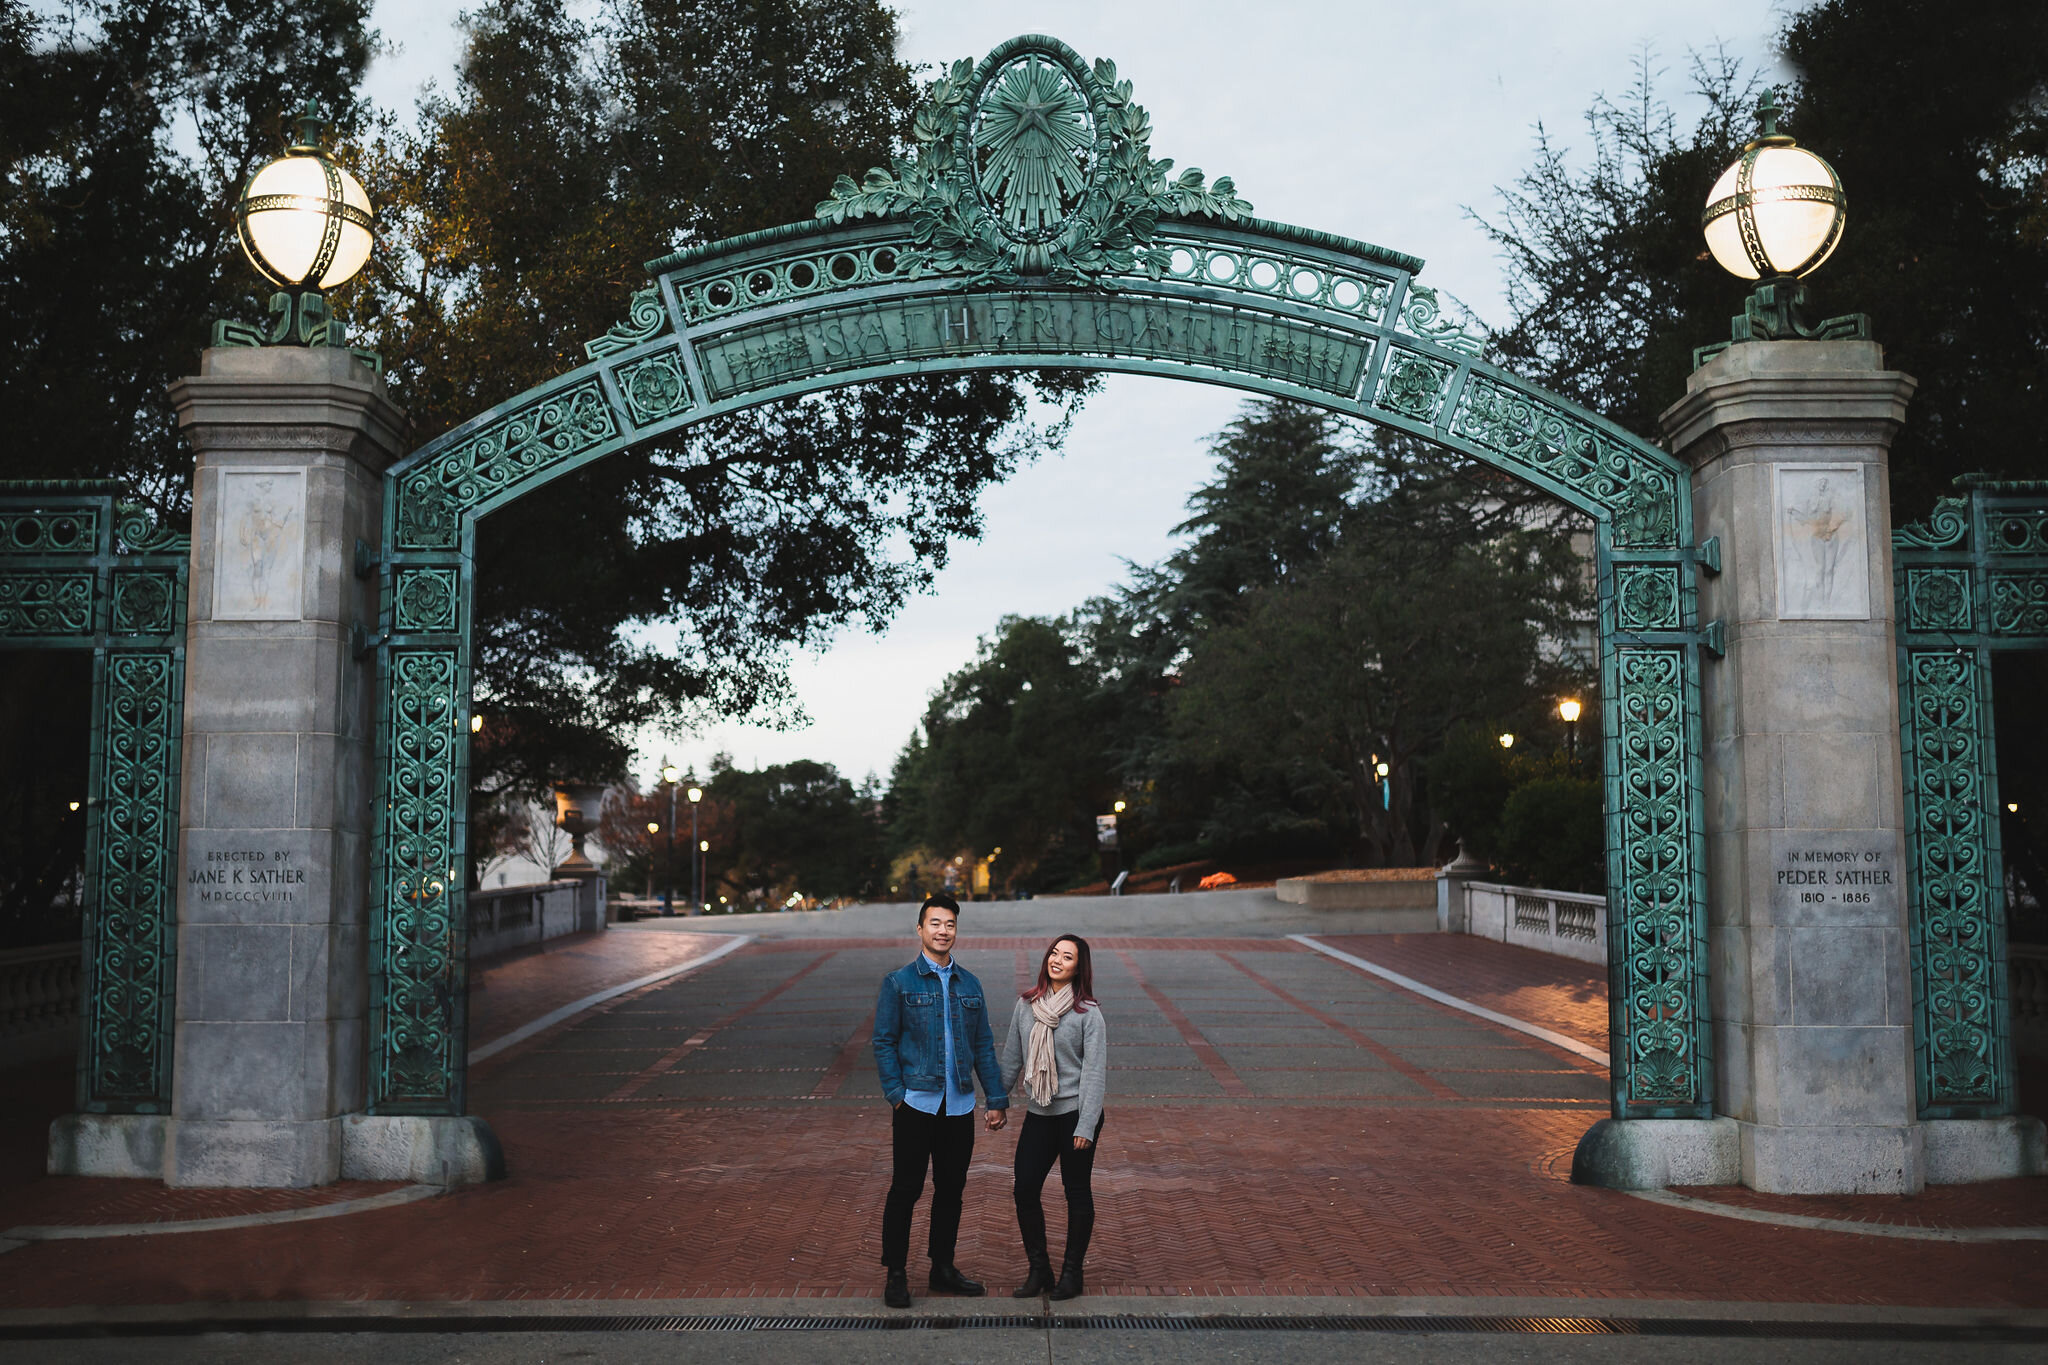 UC Berkeley Engagement Session // Bay Area Wedding Photographer  Photo by Trung Hoang Photography |www.trunghoangphotography.com | San Francisco Bay Area Wedding Photographer